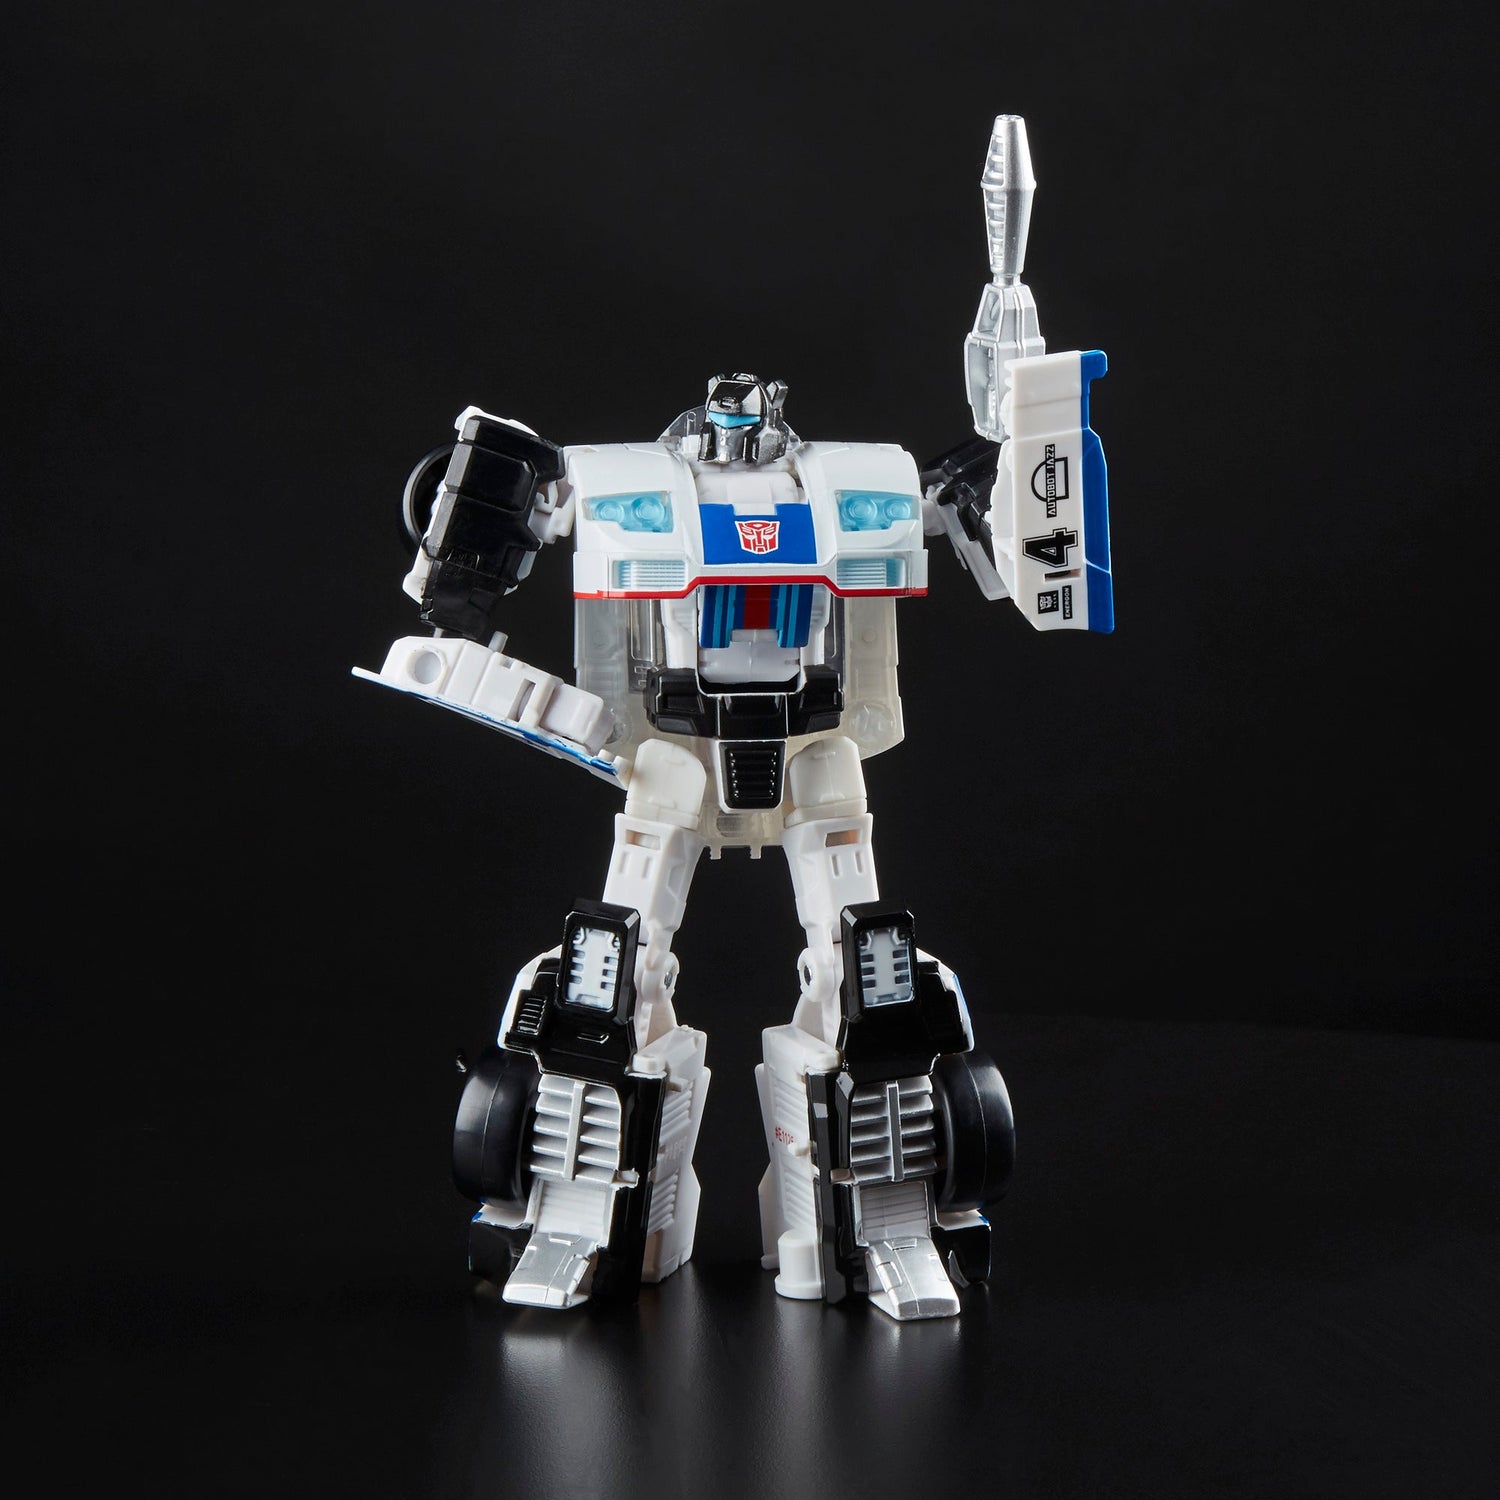 Transformers: Generations Power of the Primes Deluxe Class Autobot Jazz Figure